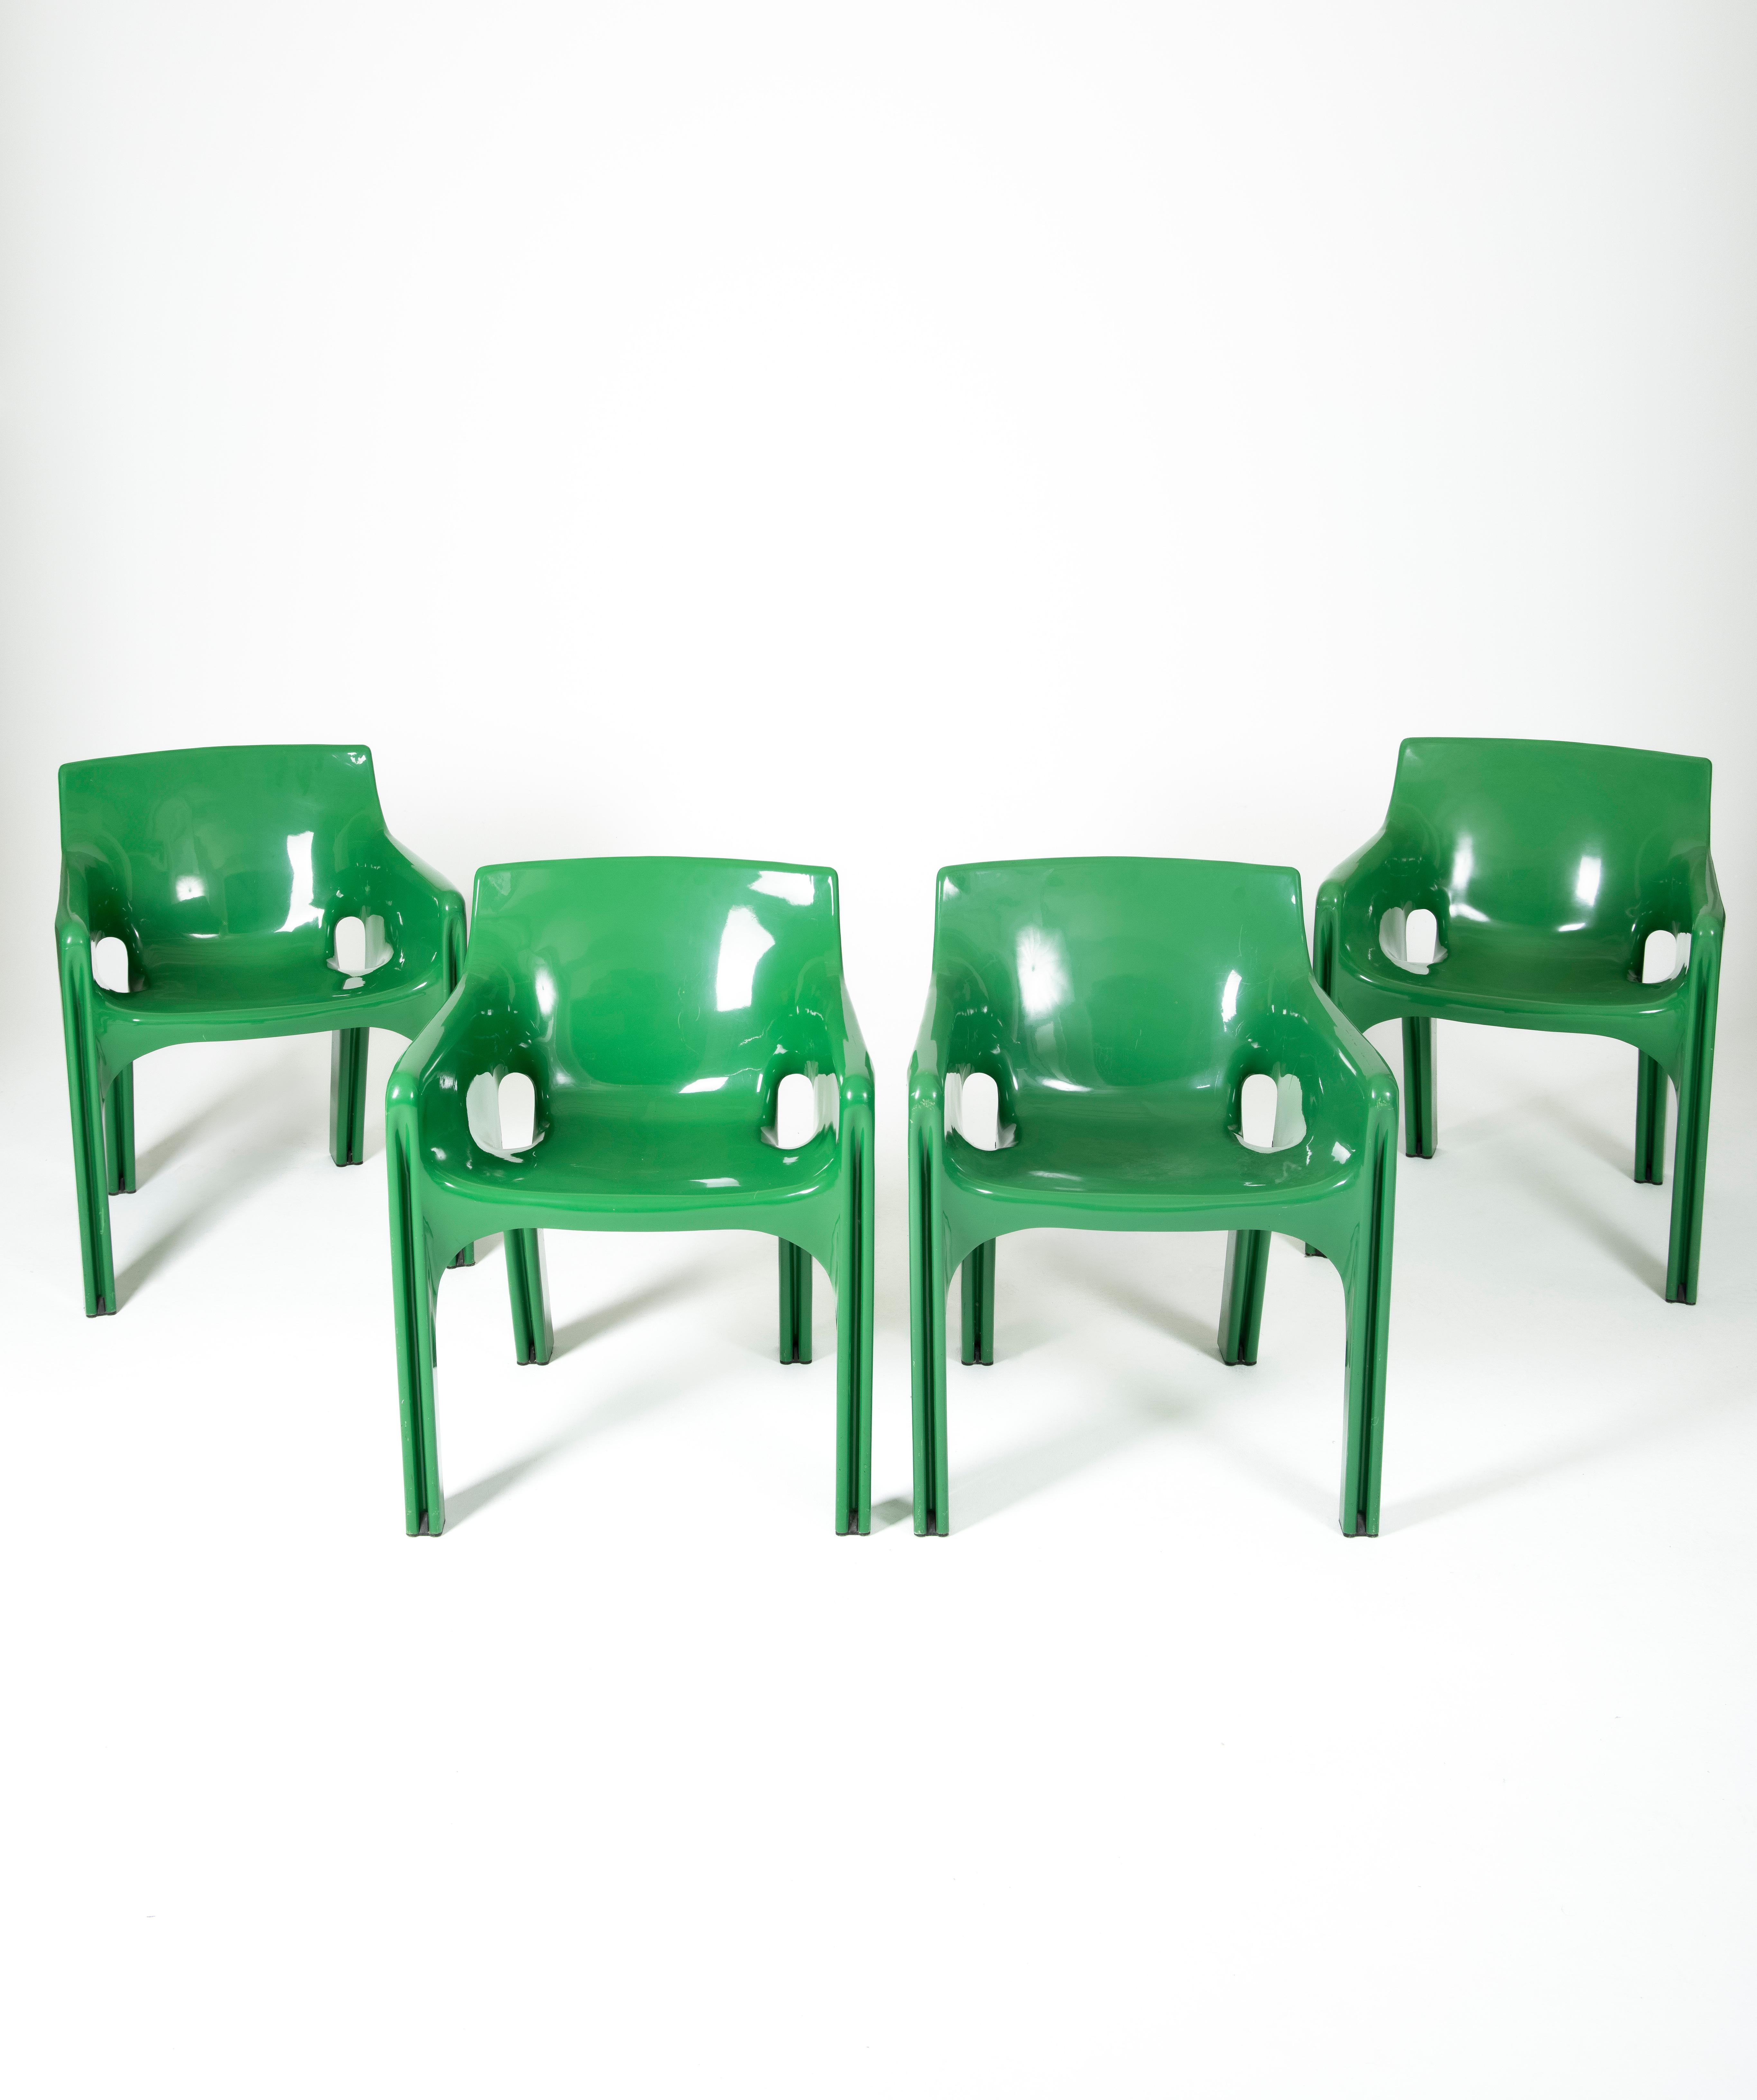 Set of 4 chairs model Gaudi designed by Vico Magistretti. Manufactured in the 1970s in Italy by Artemide. In molded plastic. Very good vintage condition. Stamp present.